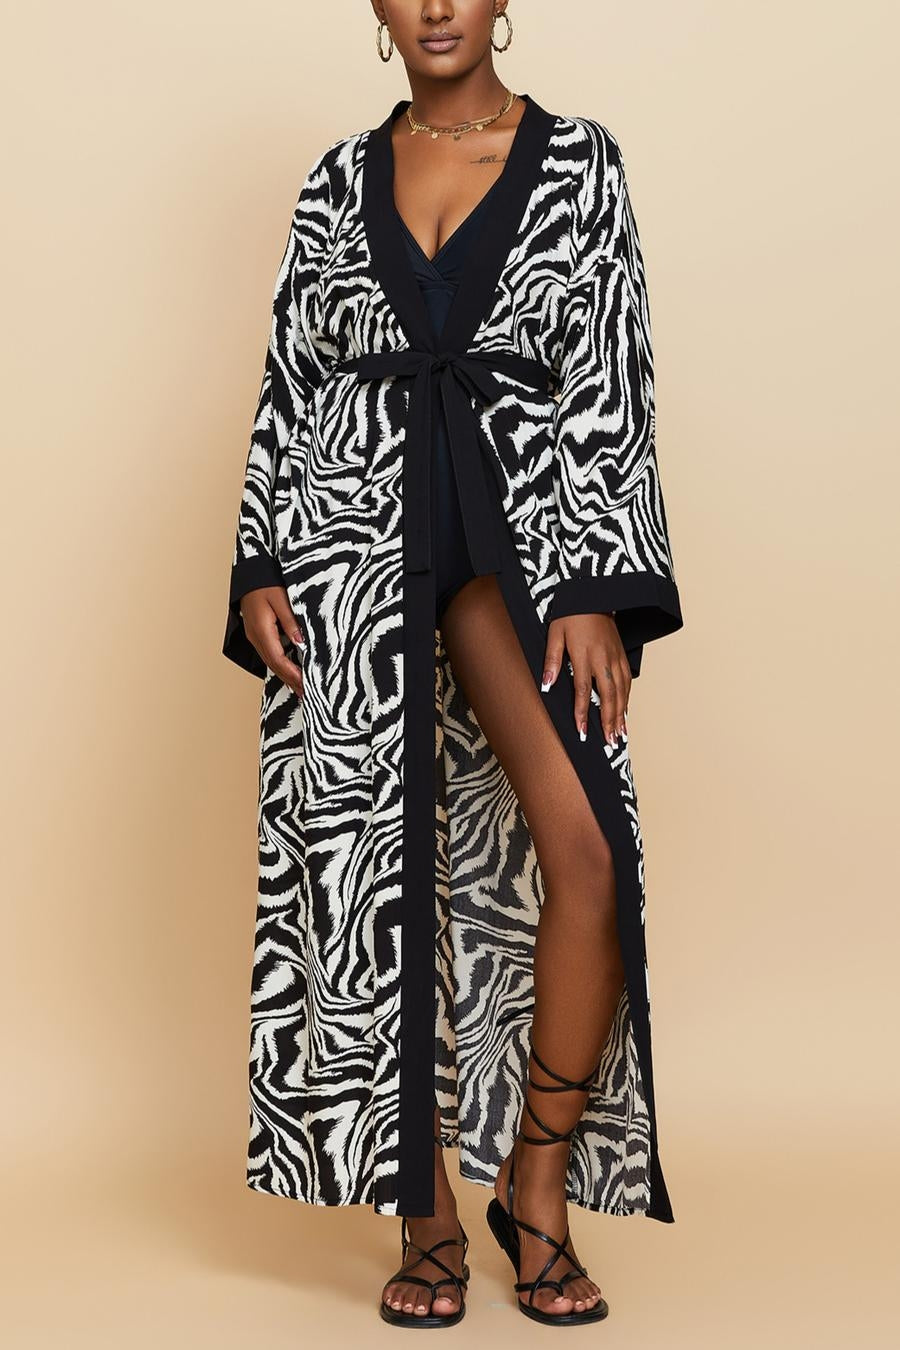 Zebra Print Kimono With Belt -Sold in Black, Blue And Yellow (One Size)